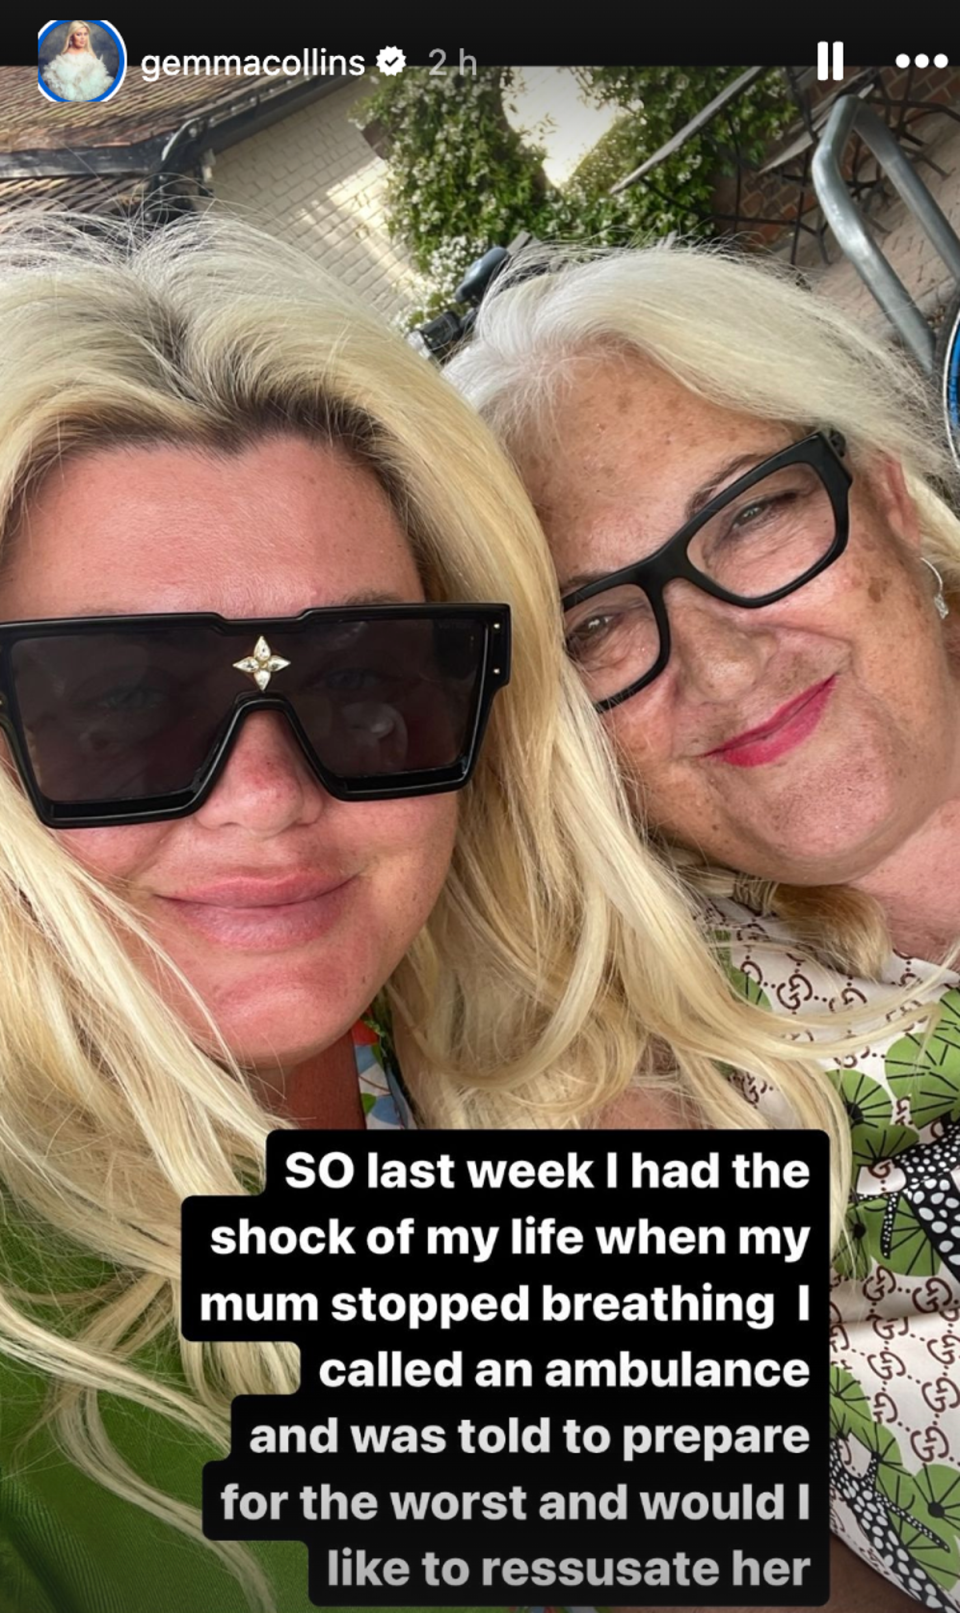 The reality star shared the update with her Instagram followers (Instagram/@gemmacollins)